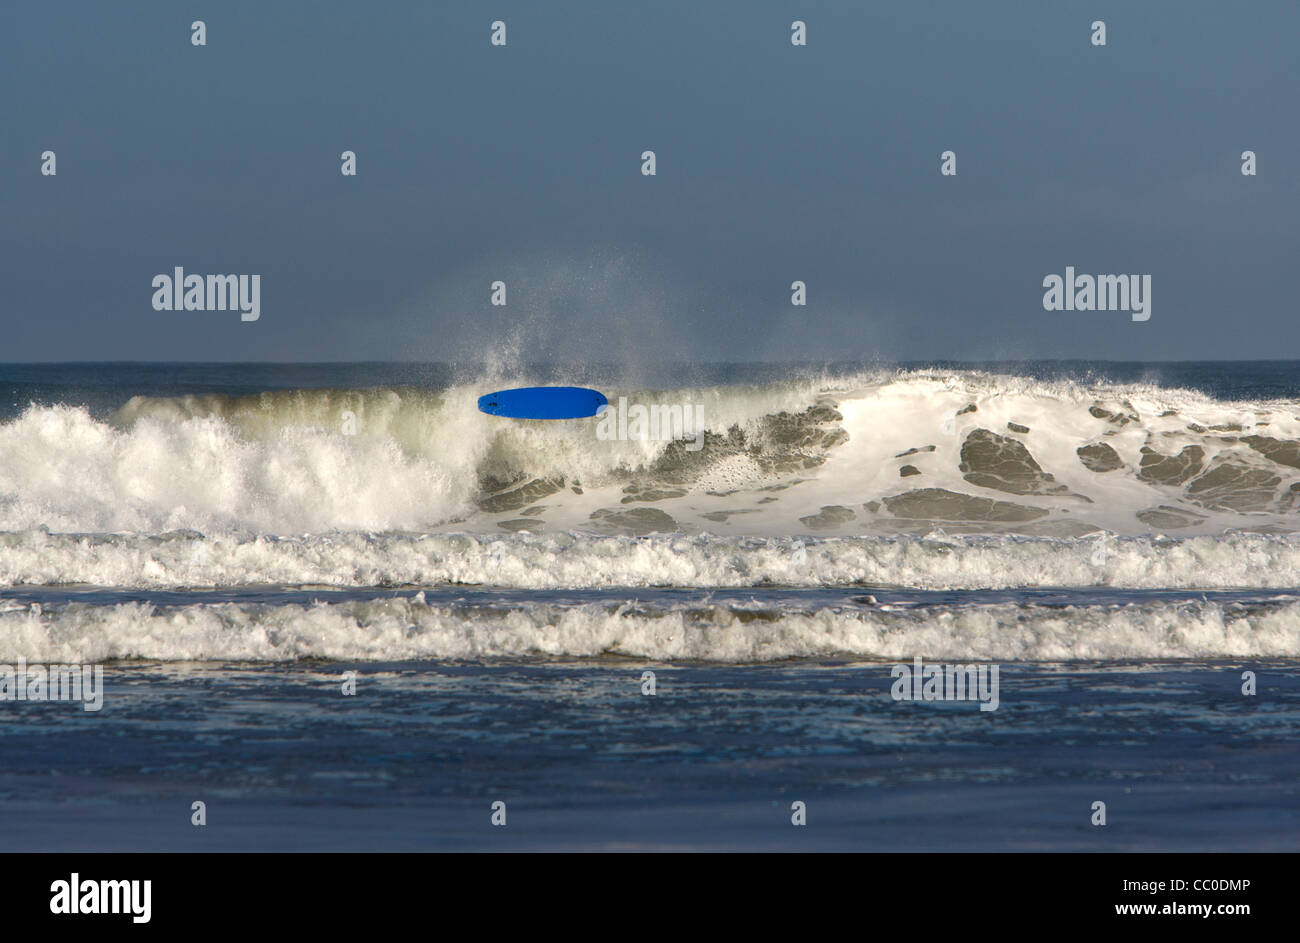 A surfer wipes out on a big wave at Porthtowan beach, Cornwall. Stock Photo